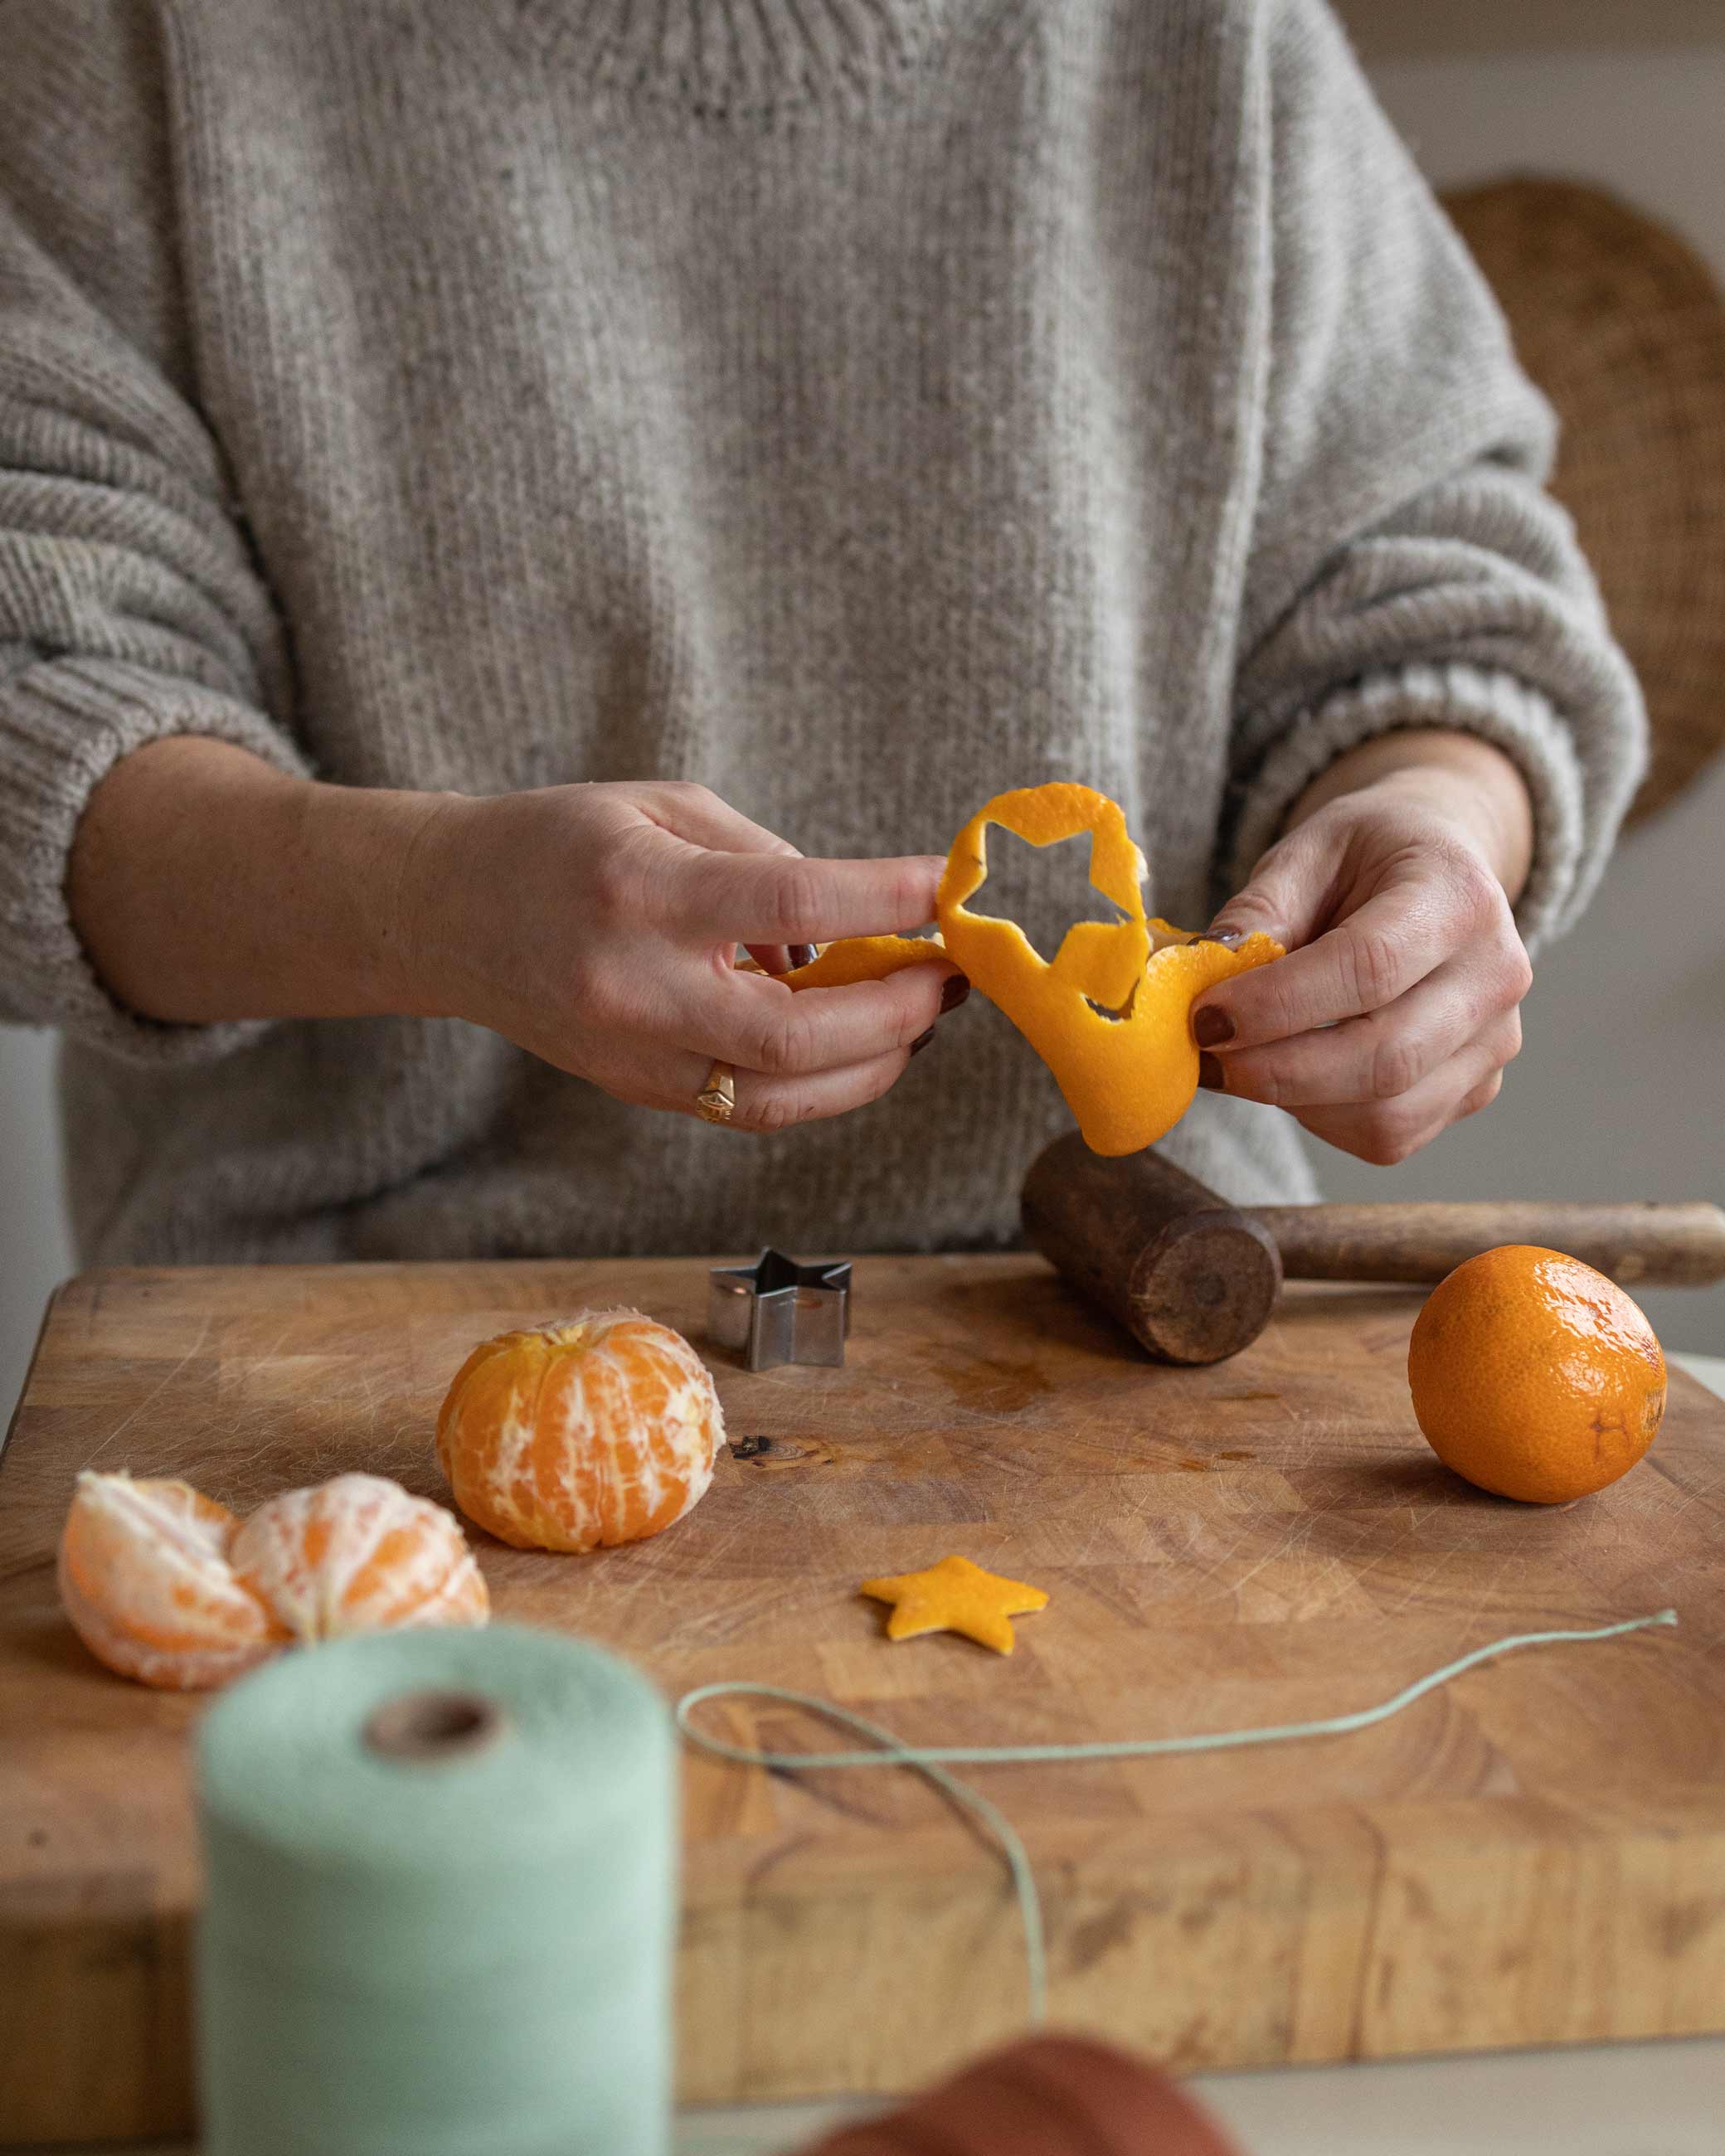 Person cutting star shape out of mandarin skin.